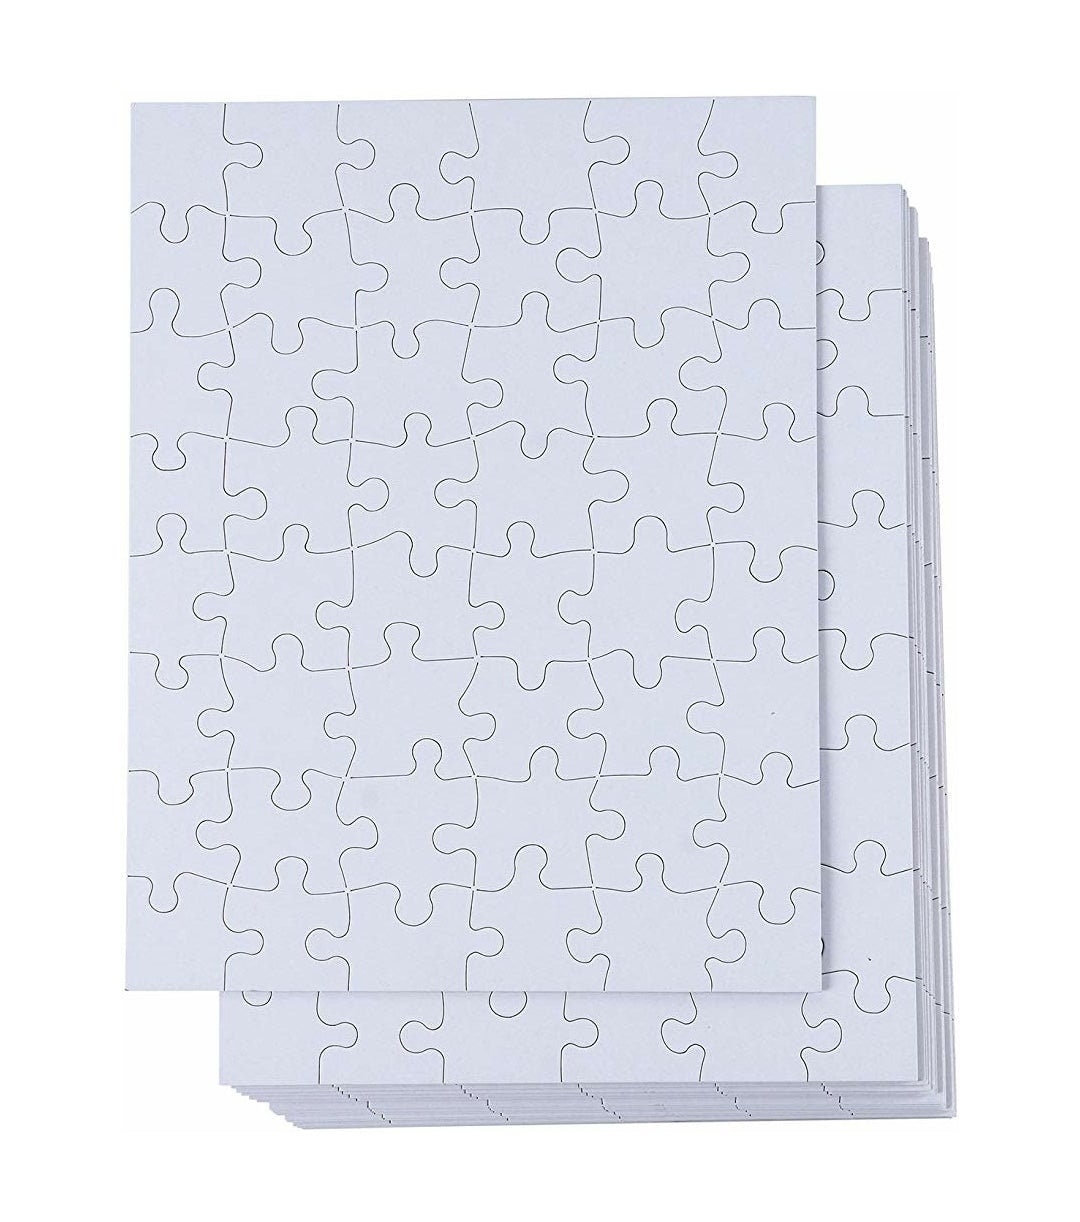 36 Blank Puzzles to Draw On, 8.5 x 11 Inch, White Jigsaw Puzzle Pieces to  Create DIY, Arts and Crafts Projects (48 Pieces Each)